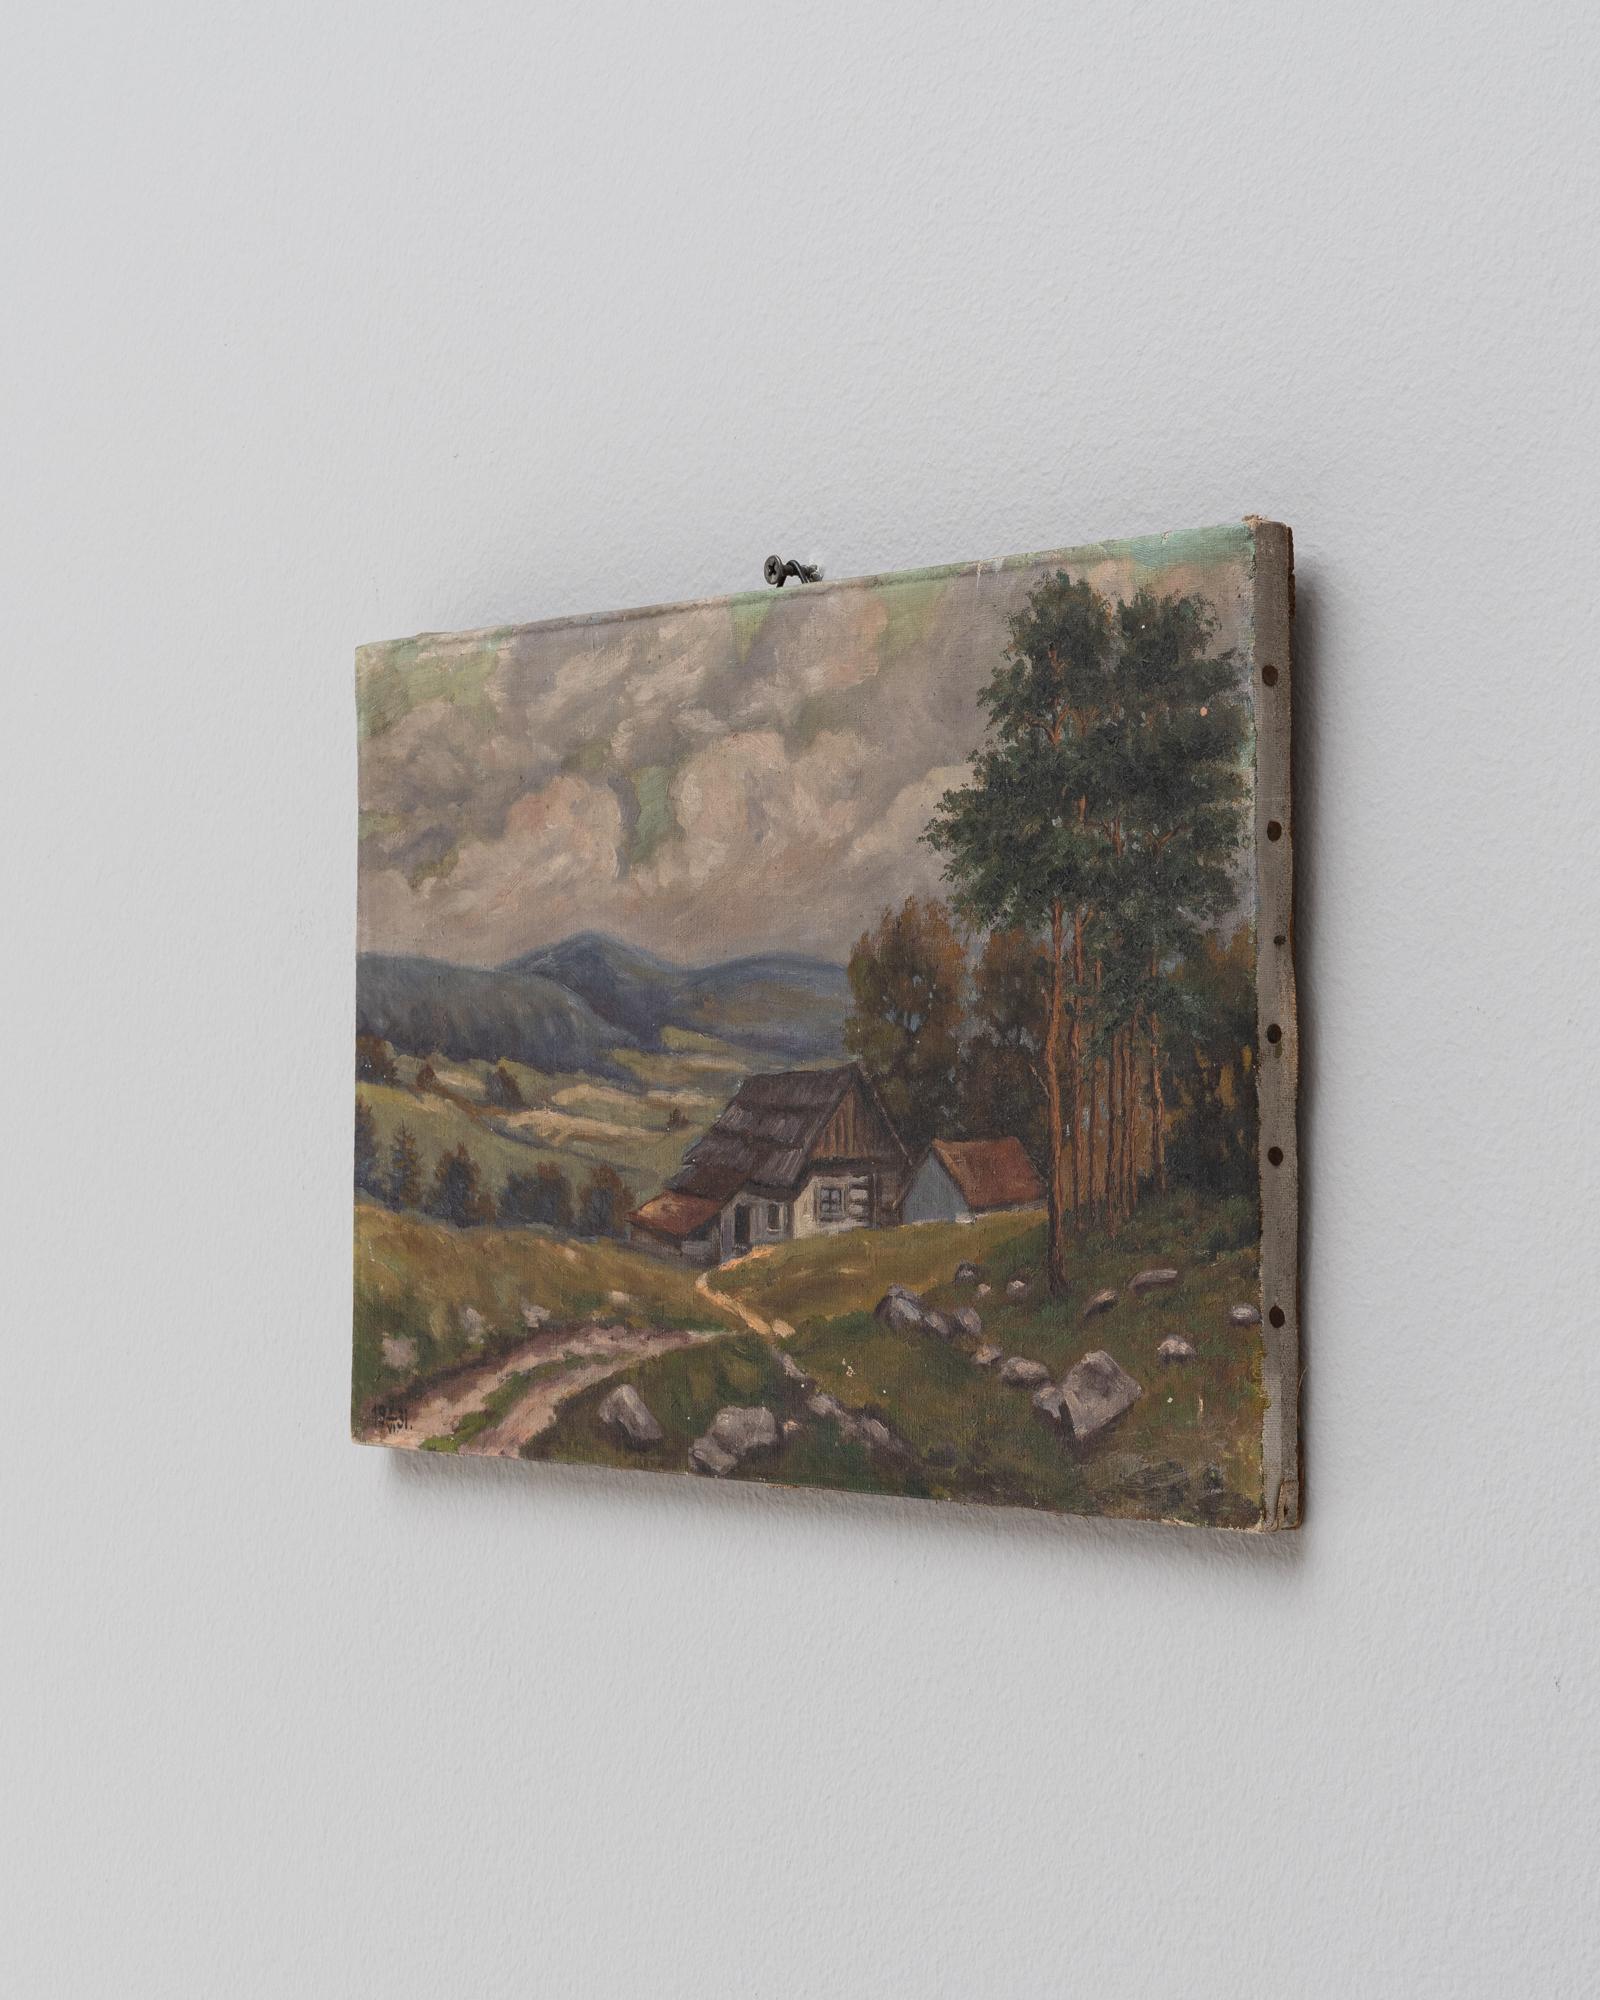 This Early 20th Century French Painting presents a tranquil landscape scene, rich with the nuanced beauty of rural France. The painting captures a serene countryside, where rustic houses nestle amidst lush trees, with rolling hills unfolding in the